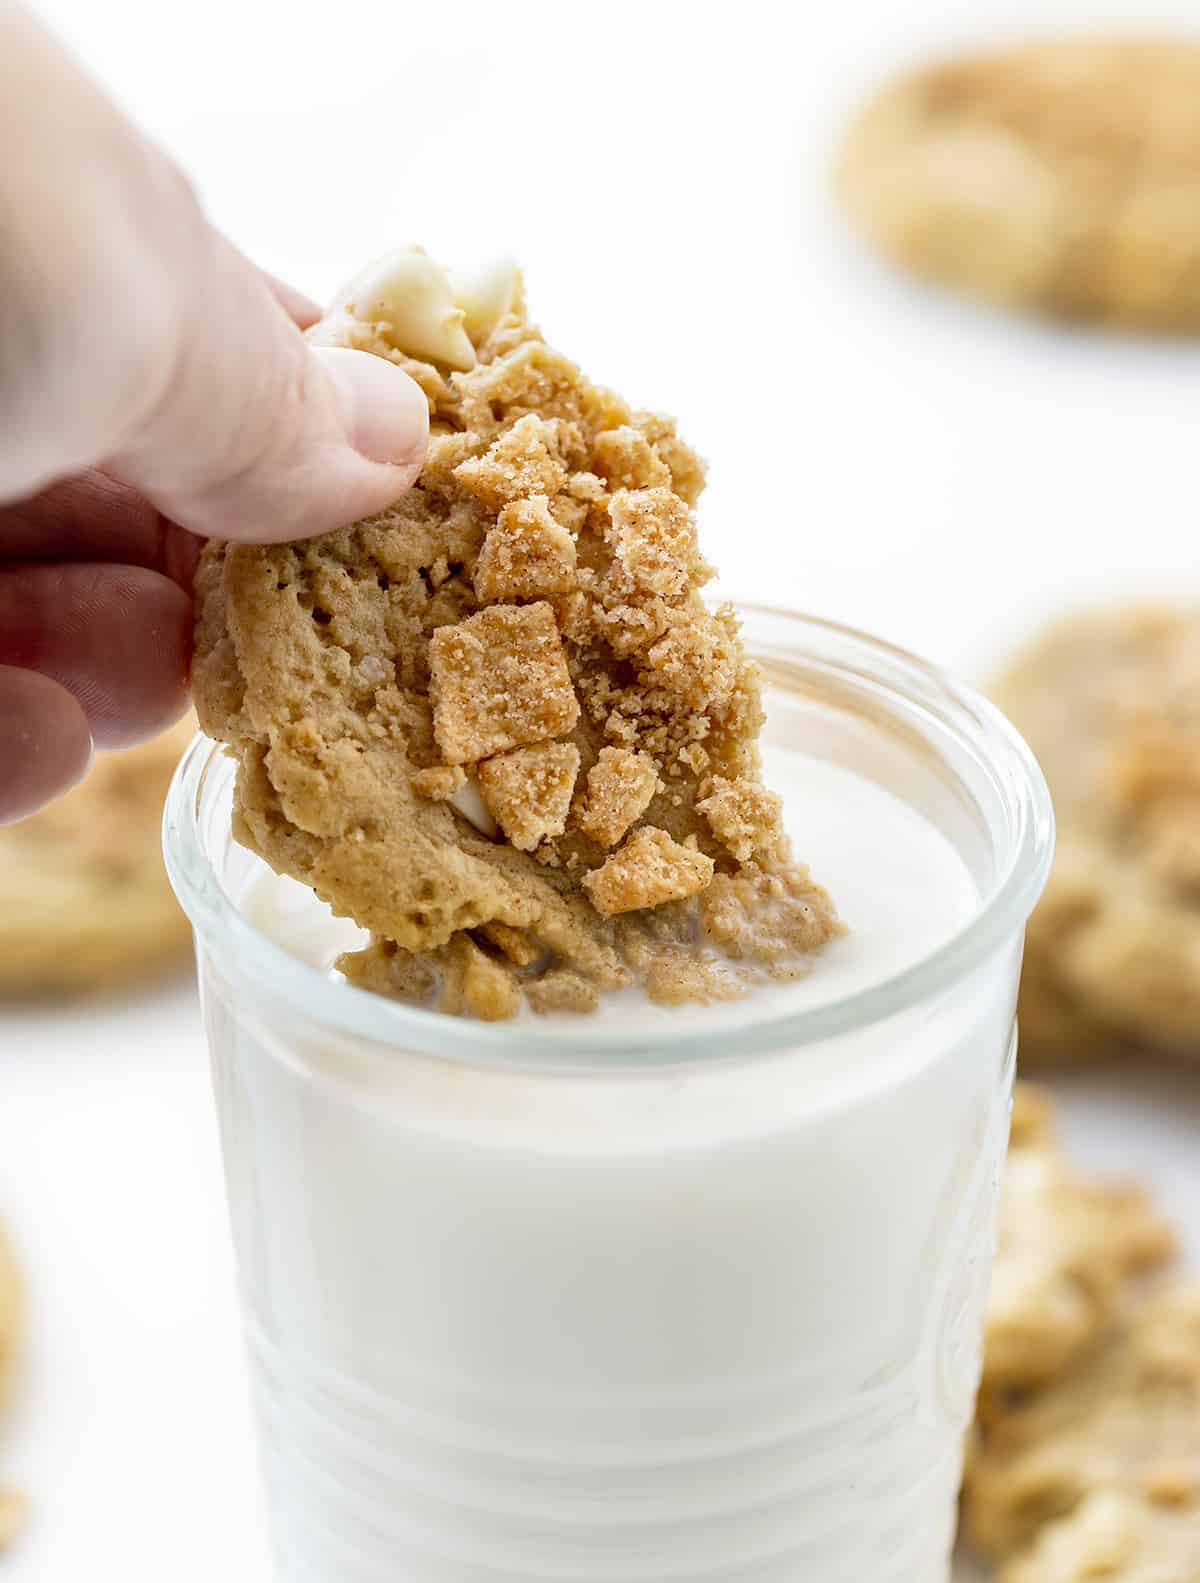 Hand Dipping a Cinnamon Toast Crunch Cookie Into Milk.